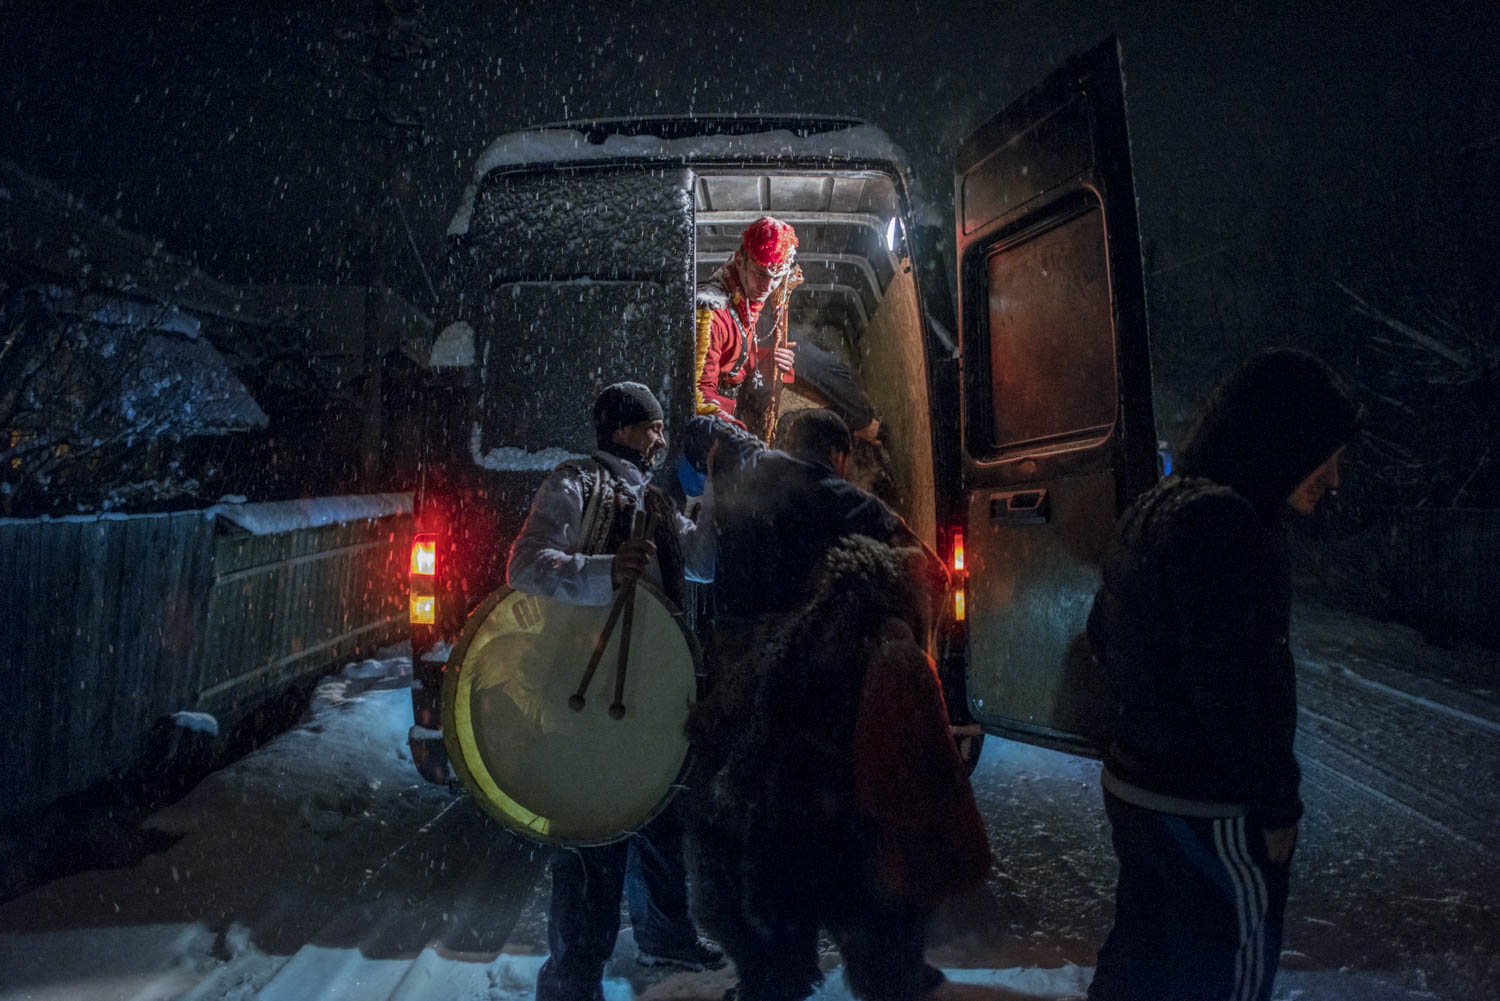  Toloaca's troupe piles into a van that will take them to the next village. In the days leading up to the New Year, troupes of bears dance their way into the night through a handful of towns and villages in the Trotuș Valley. December 28, 2014. Asău 